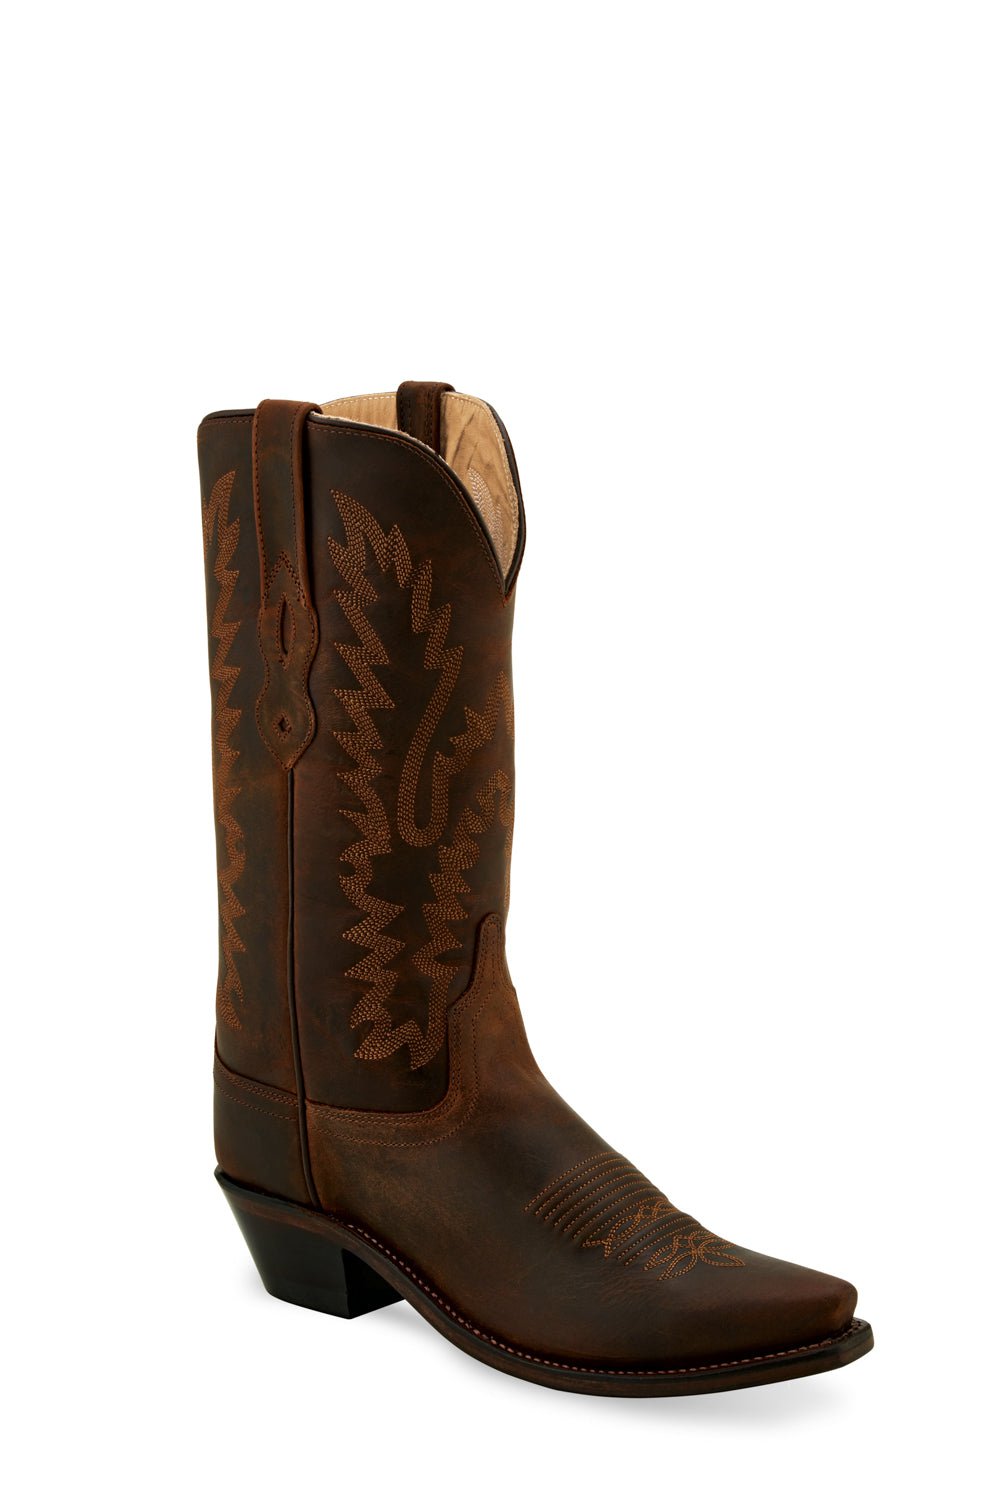 authentic womens cowboy boots